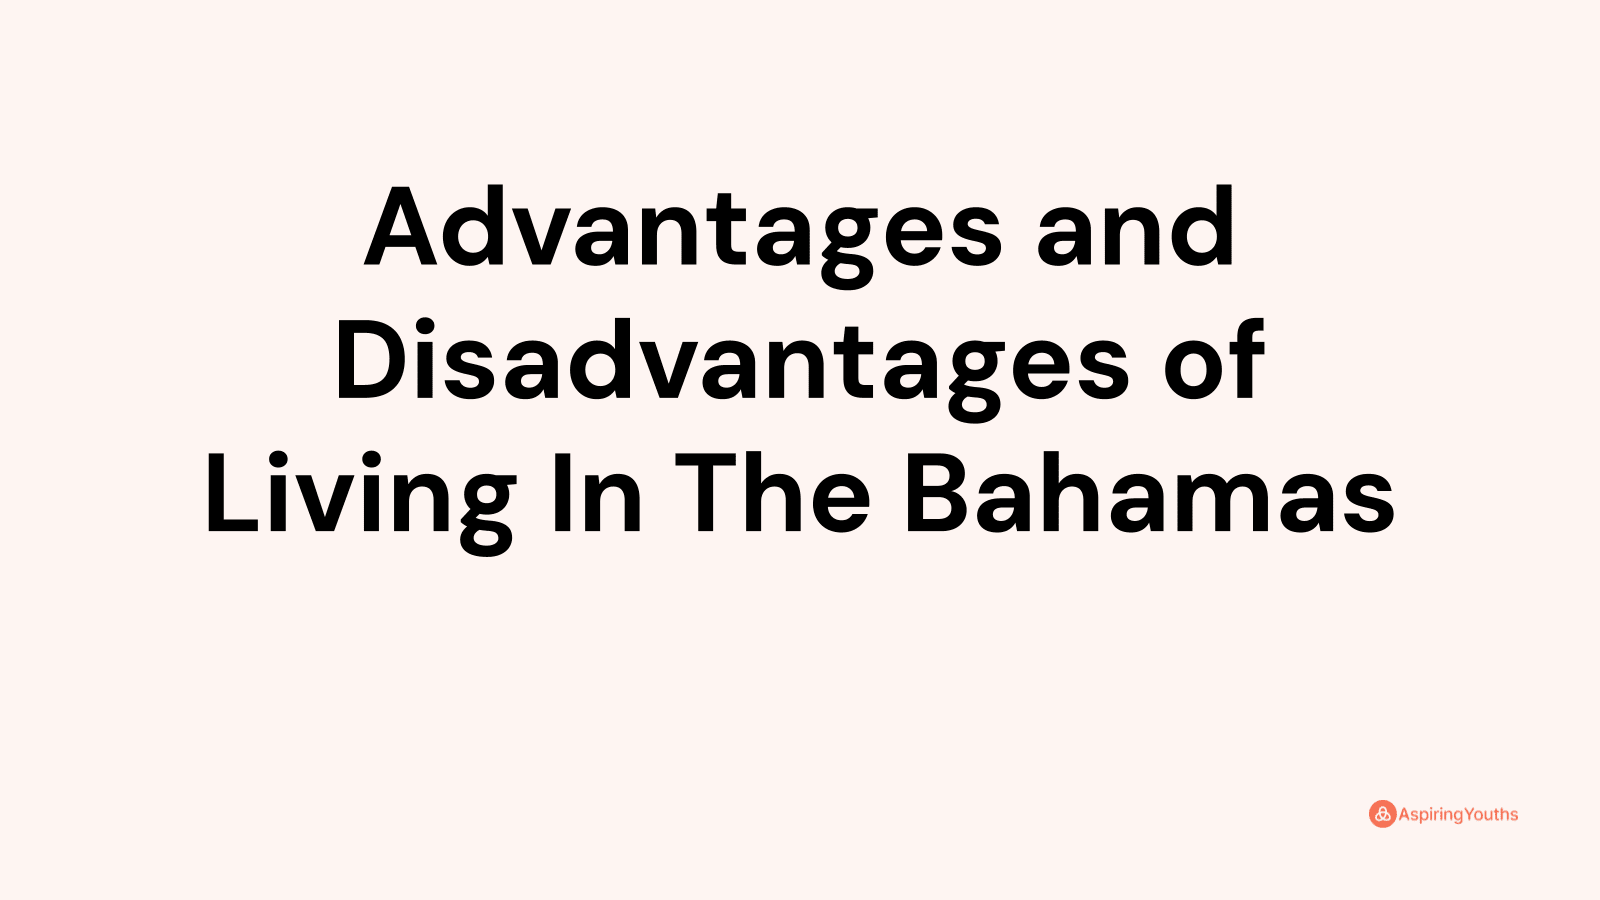 Advantages and disadvantages of Living In The Bahamas